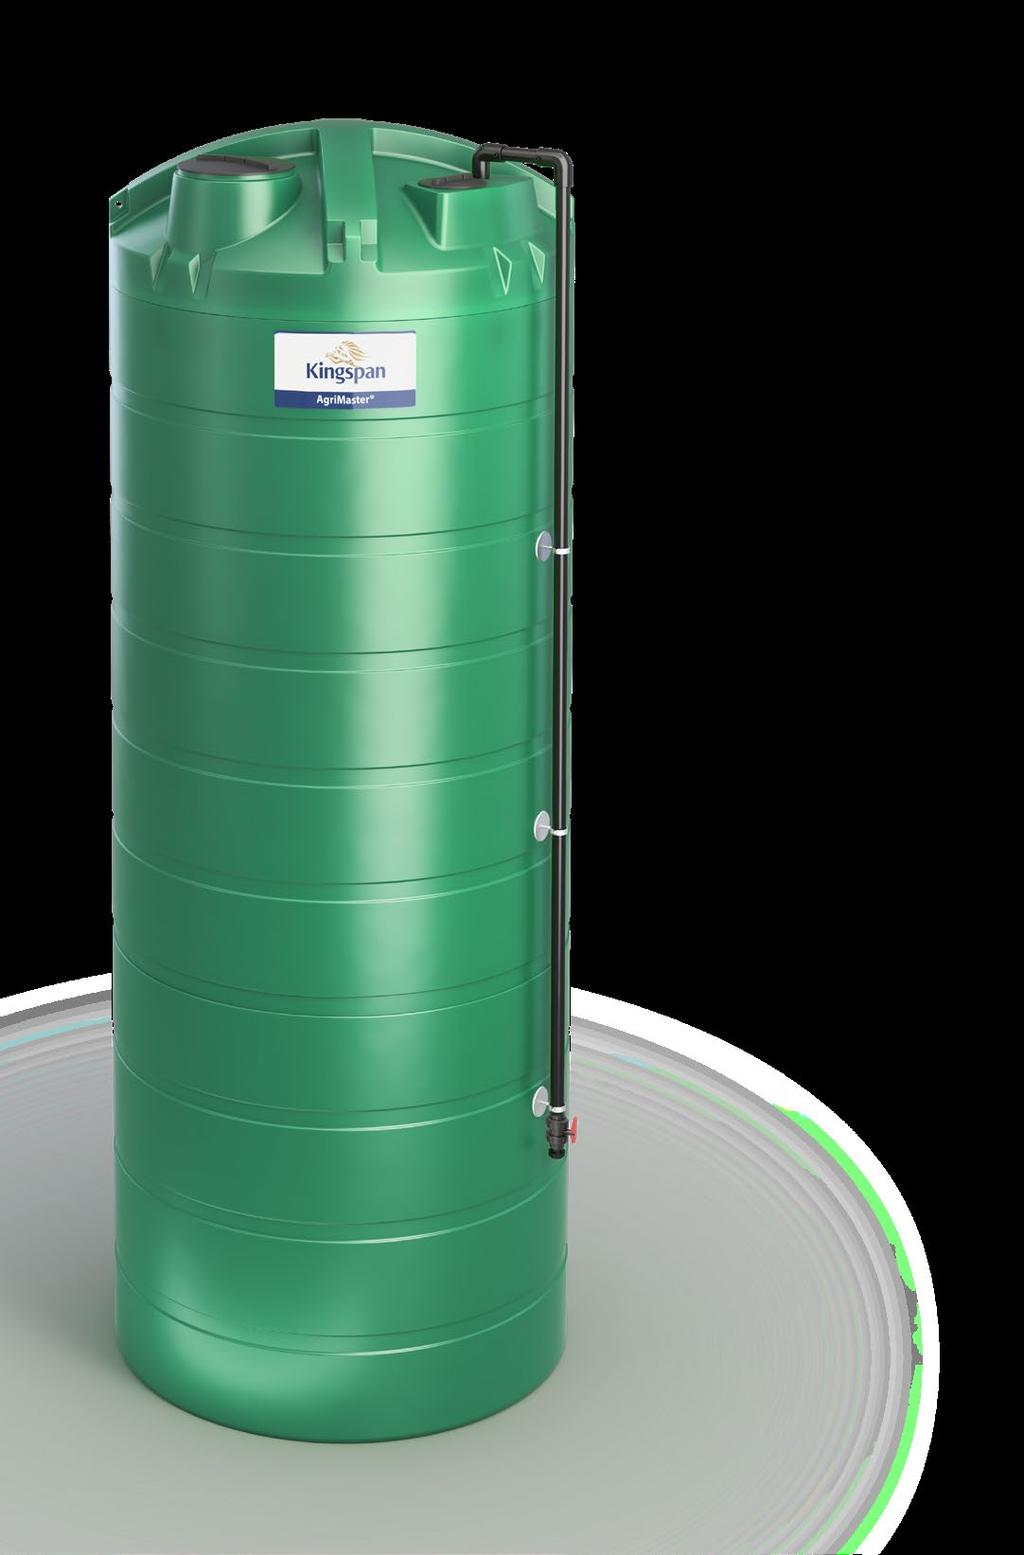 Large Capacity Offering Easily Transported Tank Warranty 10 The AgriMaster Range The AgriMaster range offers farms across the globe a robust and reliable liquid fertiliser storage solution, in